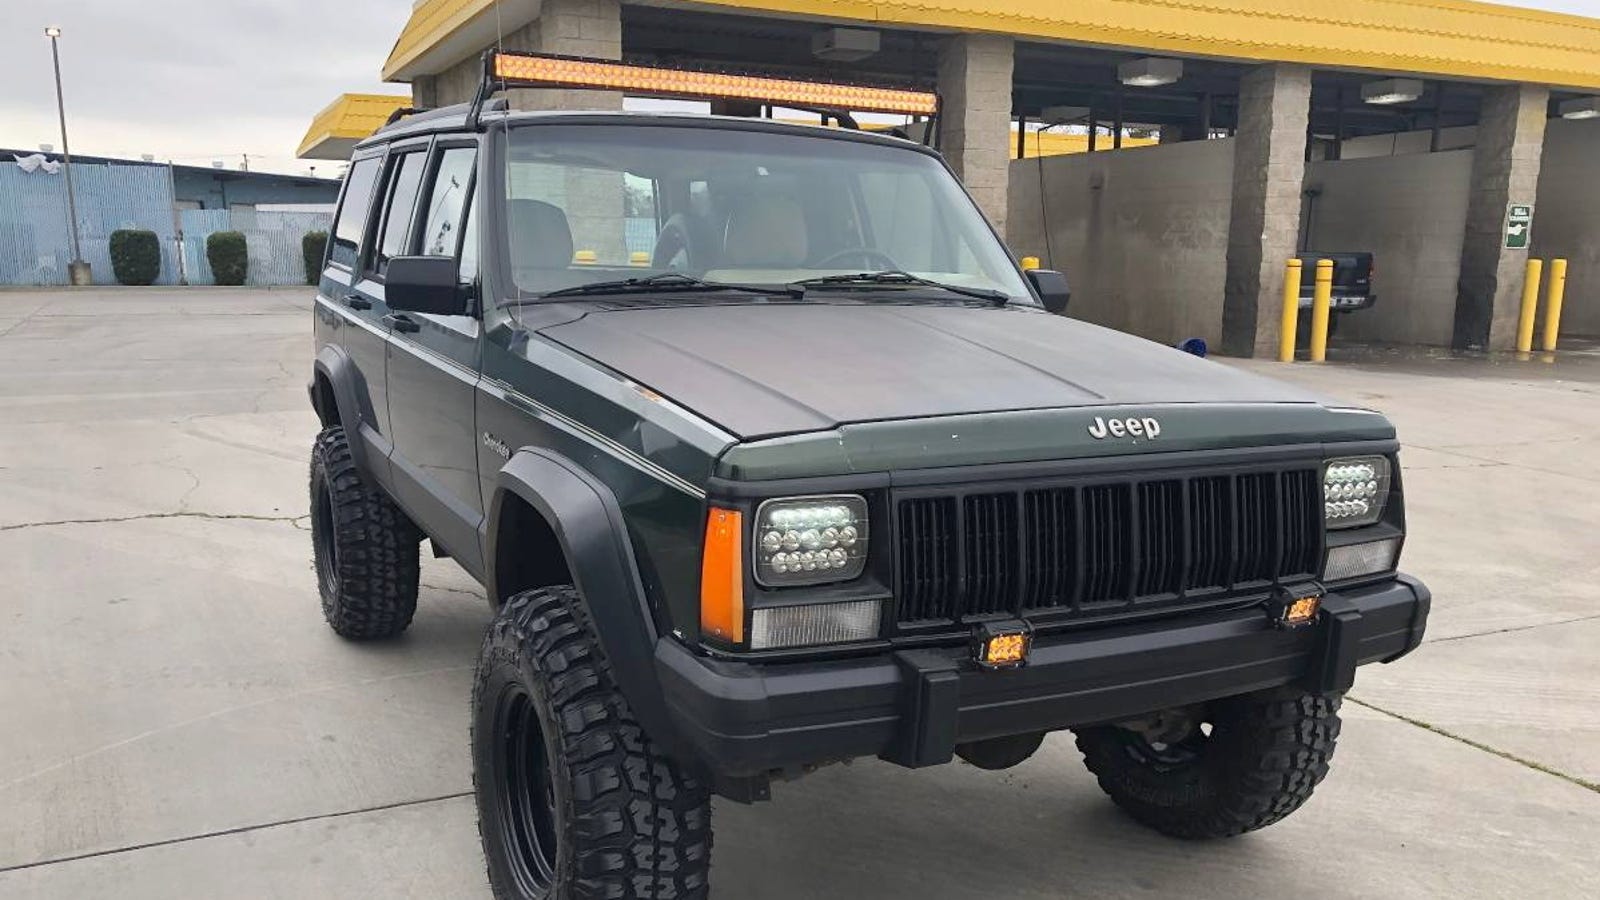 At 4,999, Does This Raised Up 1996 Jeep Cherokee Come